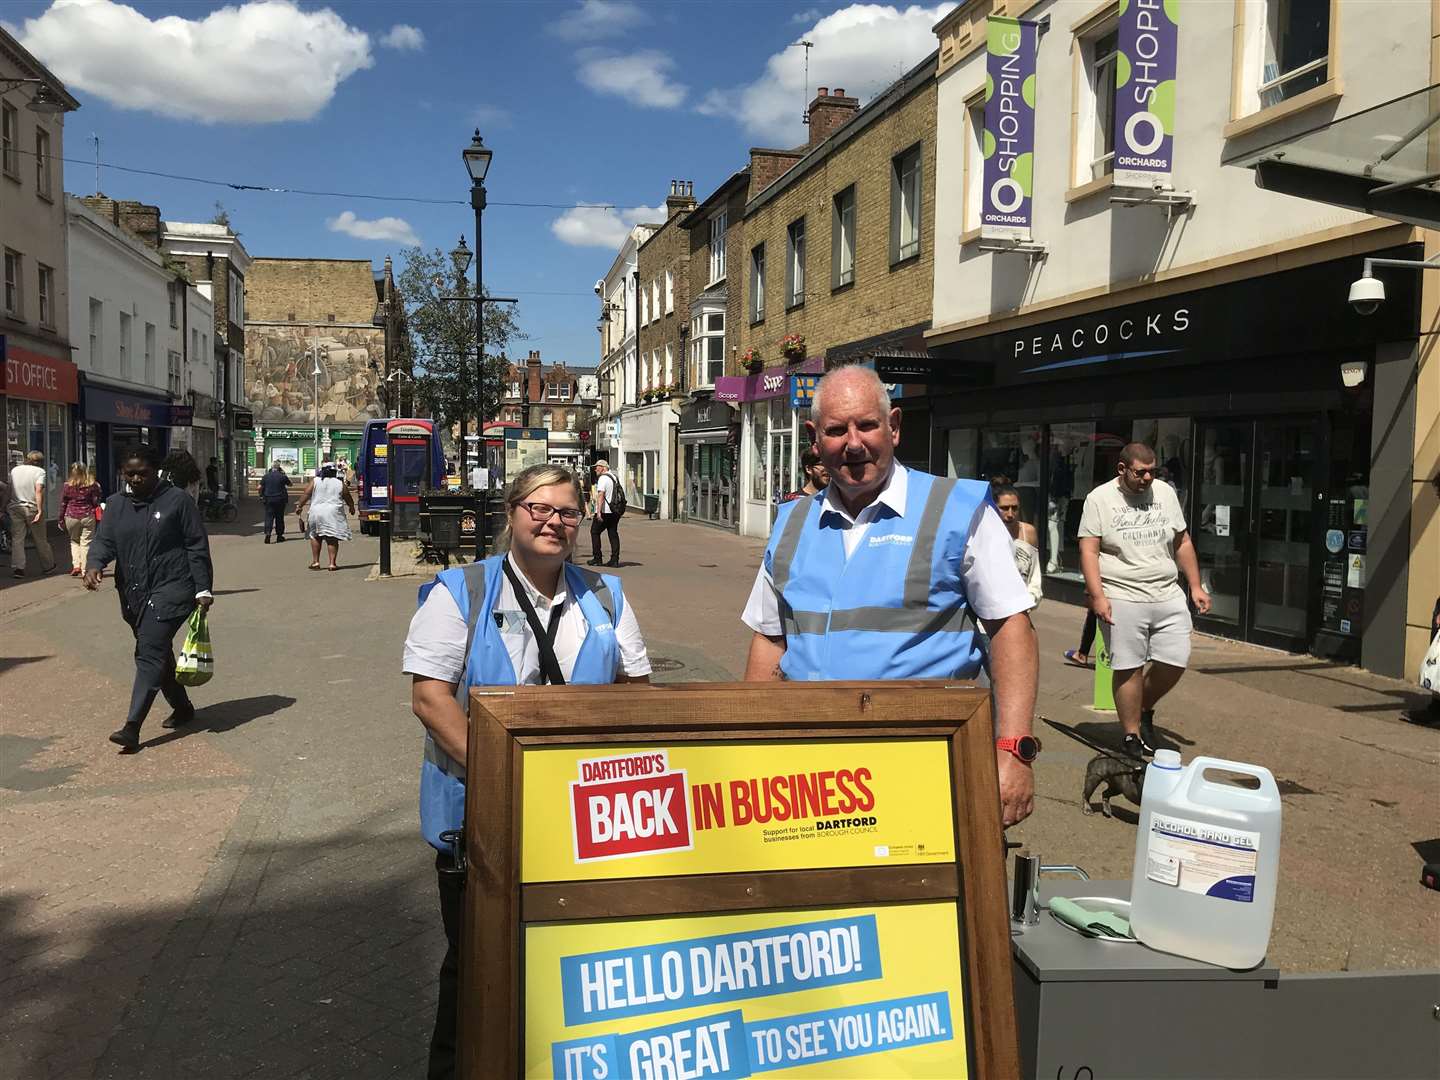 Dartford High Street has been reopened following a relaxation of lockdown measures